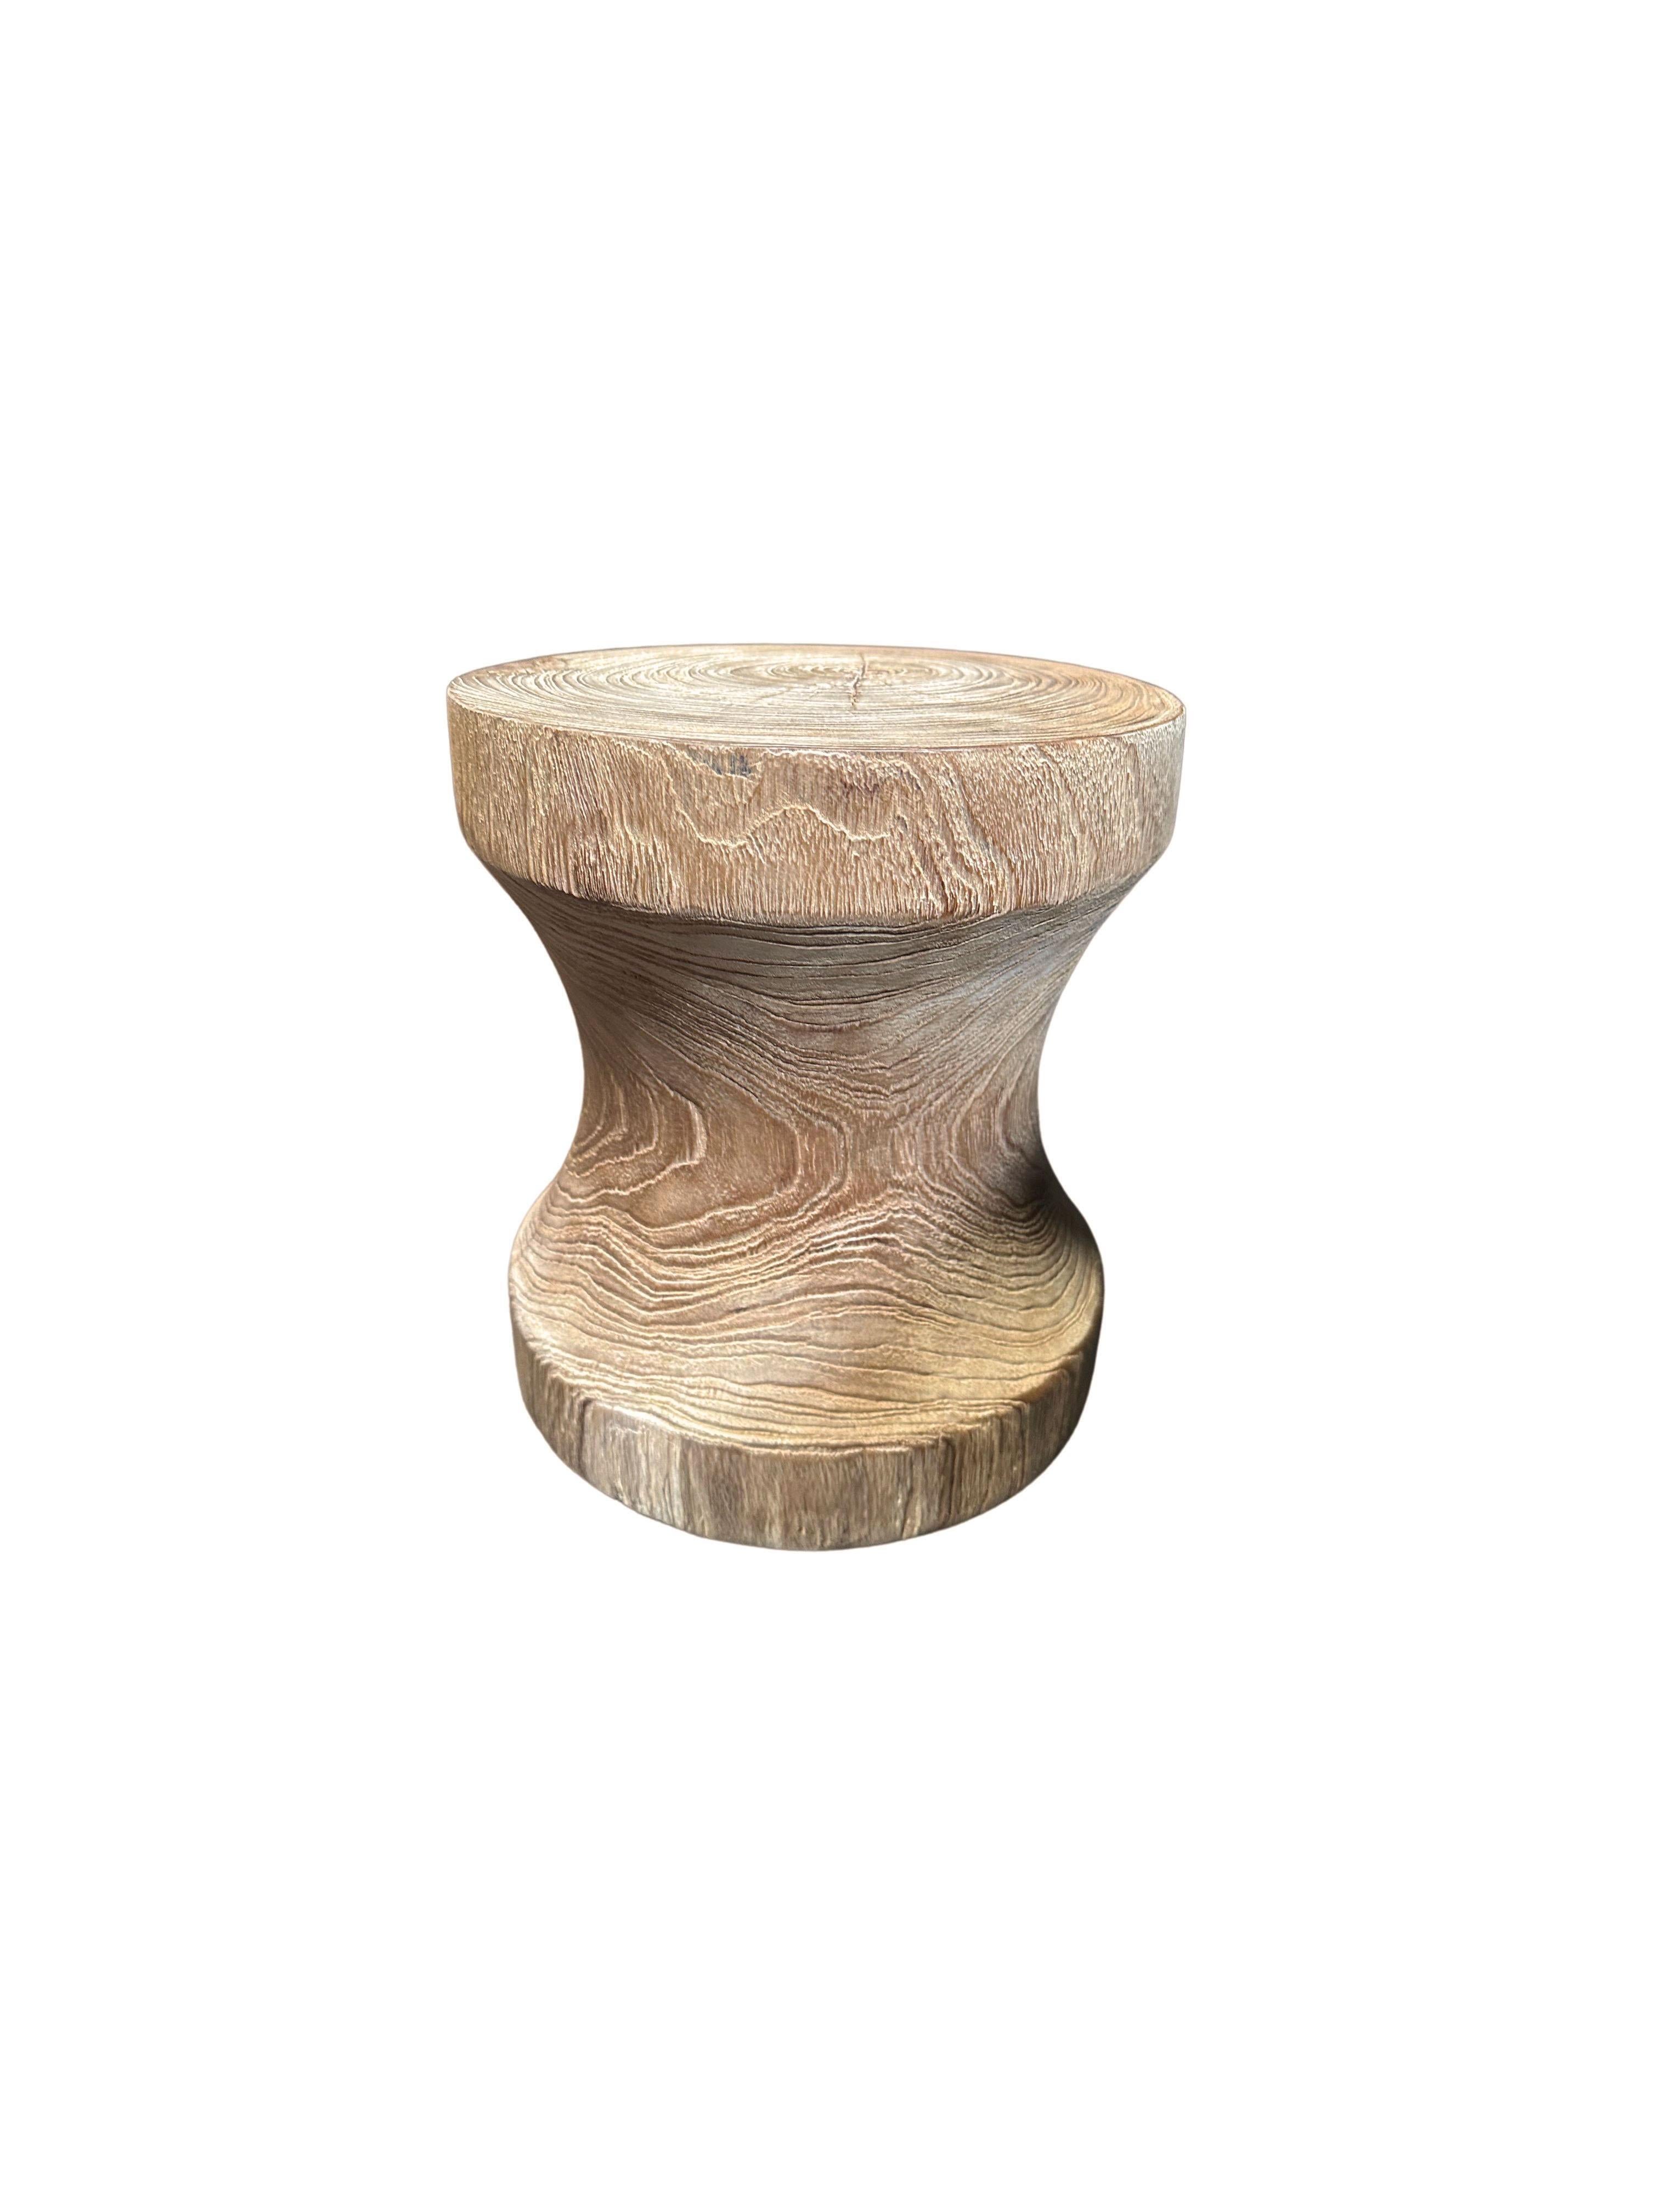 Sculptural Side Table Crafted from Teak Wood, With Stunning Textures In Good Condition For Sale In Jimbaran, Bali